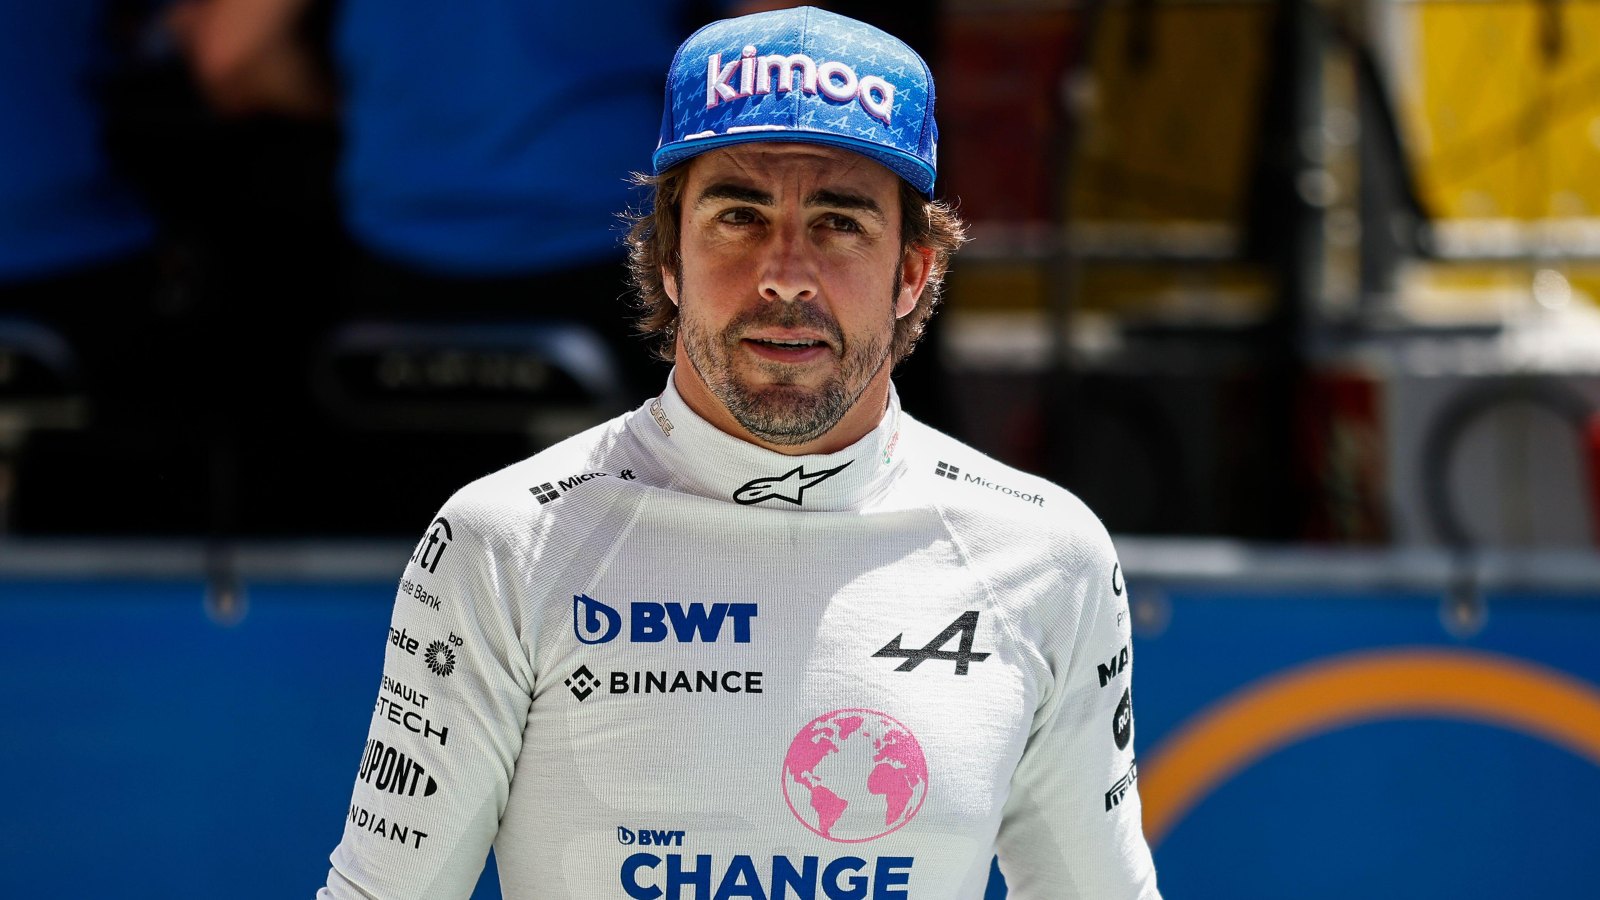 Fernando Alonso looks up whilst walking down the track. Barcelona, May 2022.